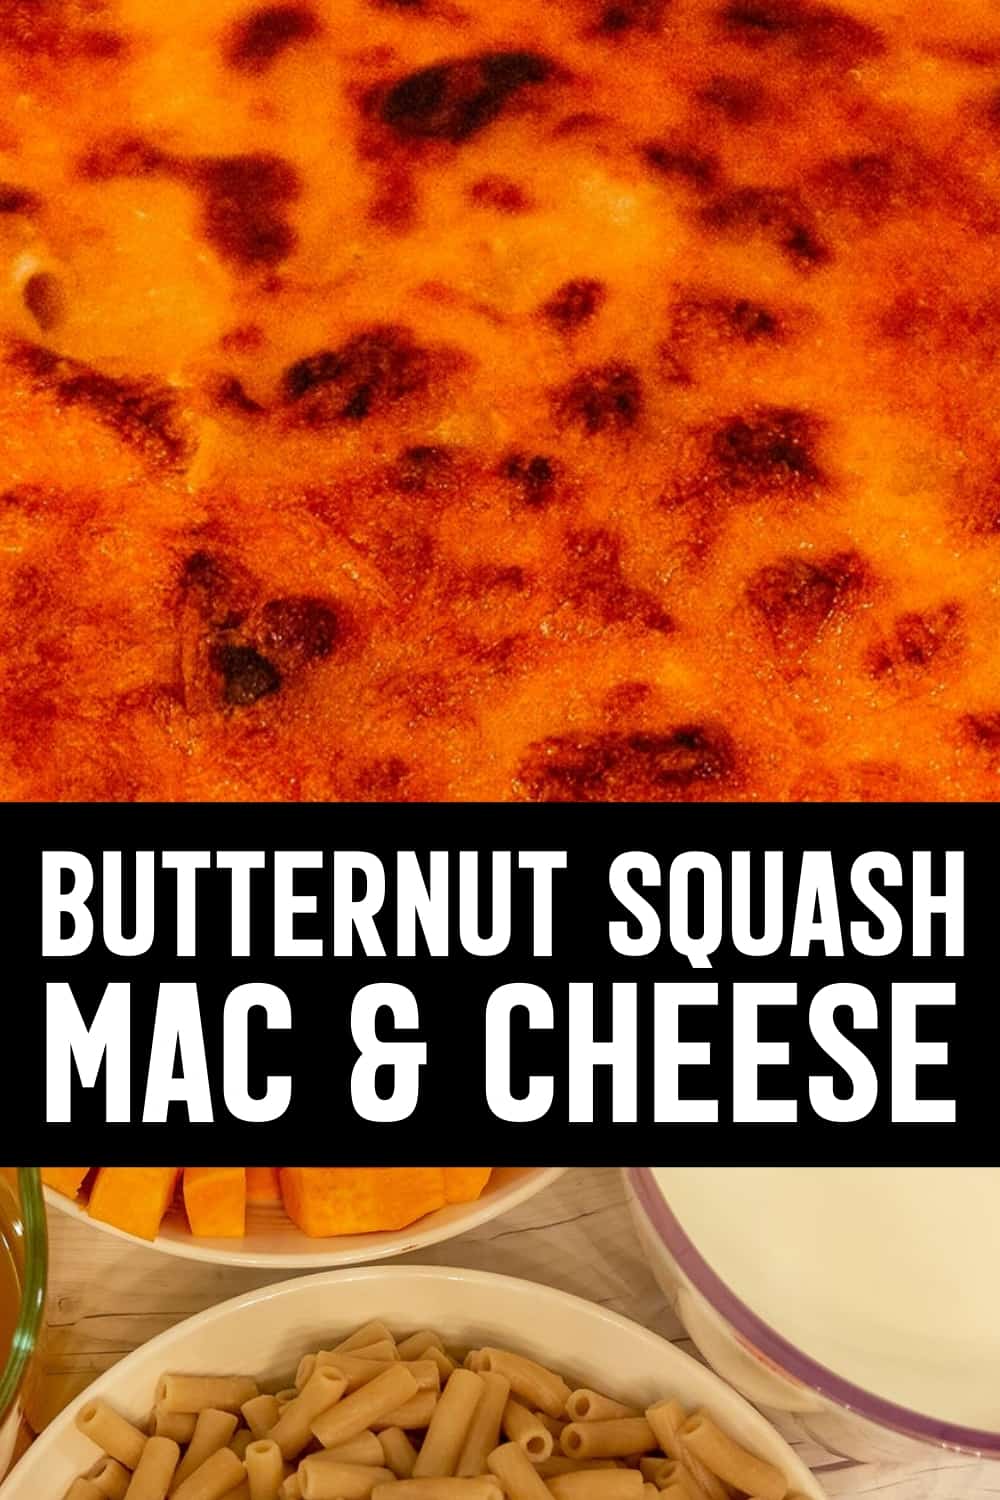 Comfort Food Pure. This (gluten-free) Mac and Cheese with creamy butternut squash is a real crowd pleaser. #macandcheese #howto #butternutsquash #easyrecipe #glutenfreepasta #glutenfreemealprep #glutenfreerecipes #easyrecipe #comfortfood ♡ cheerfulcook.com via @cheerfulcook